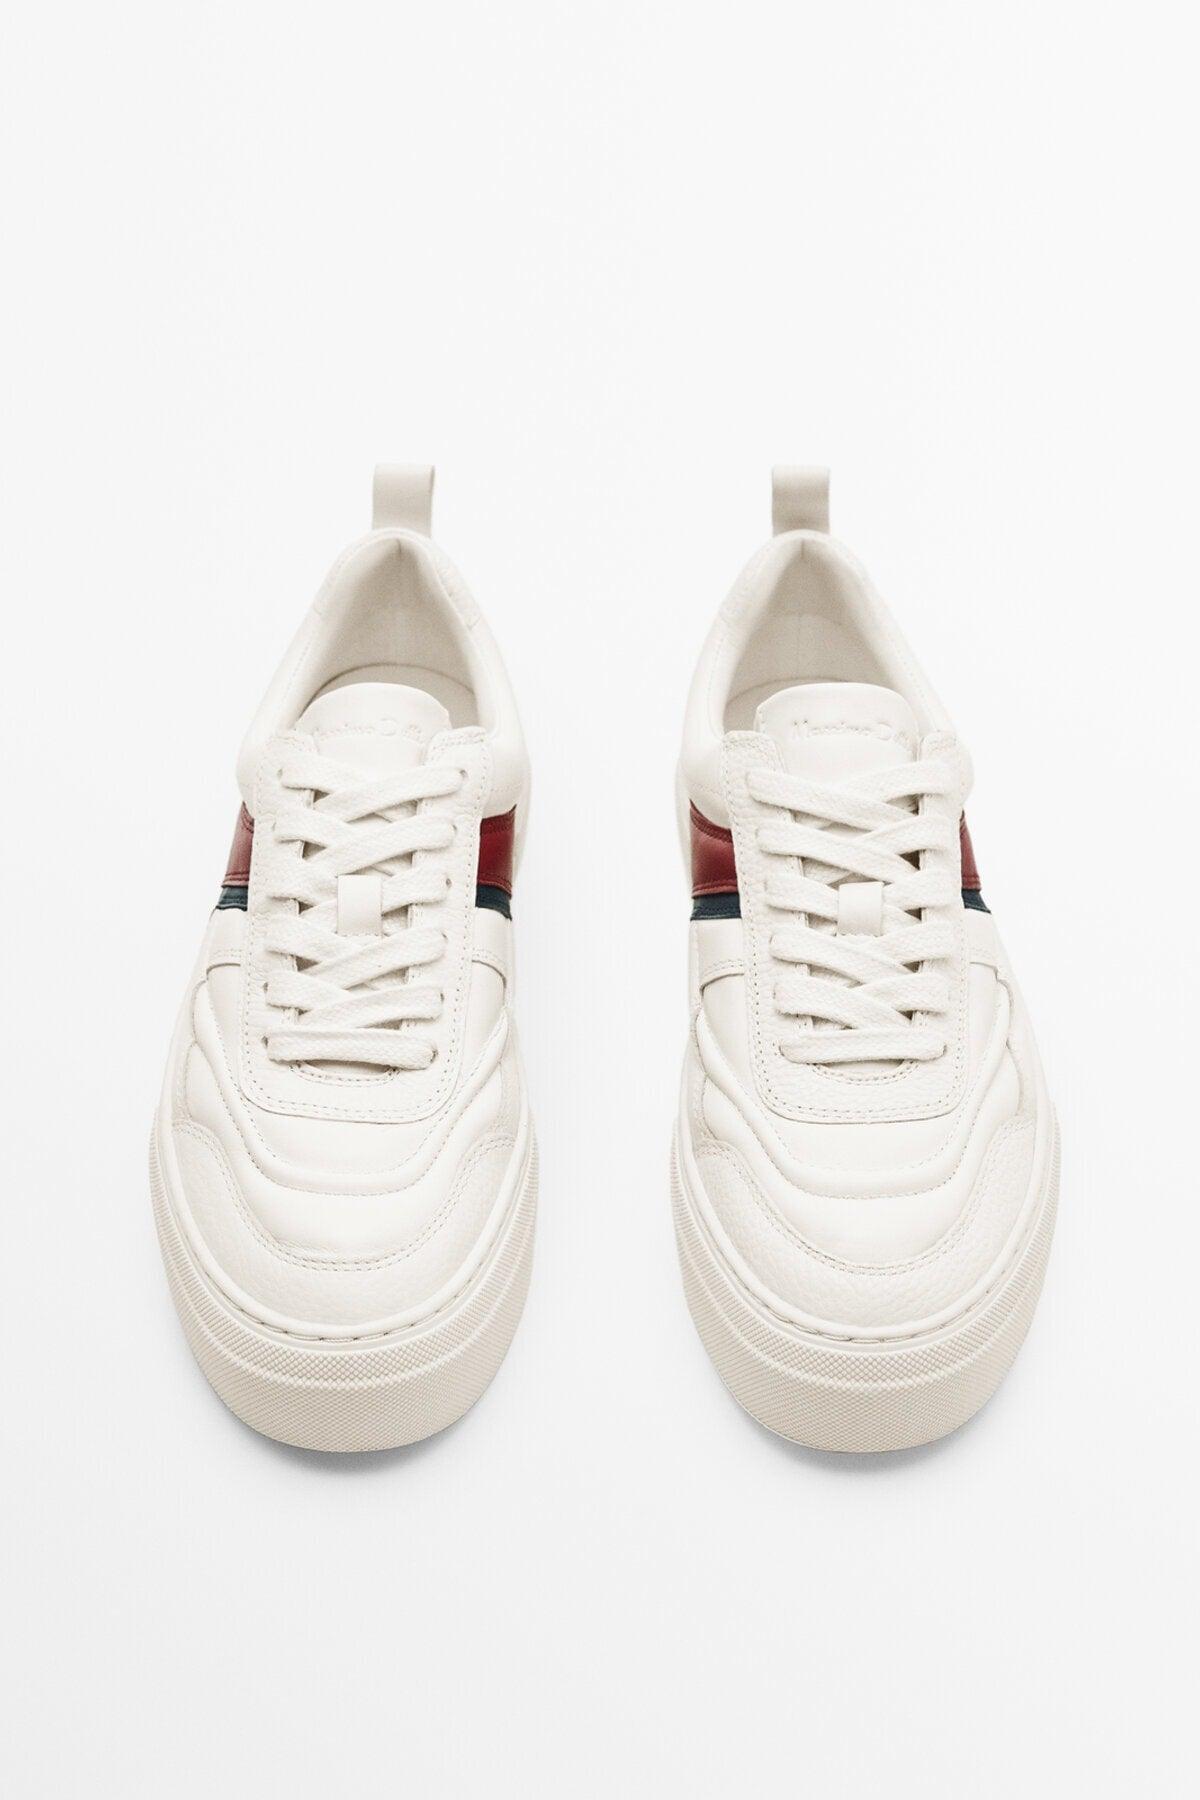 White - Contrast Leather Sneakers - Swordslife